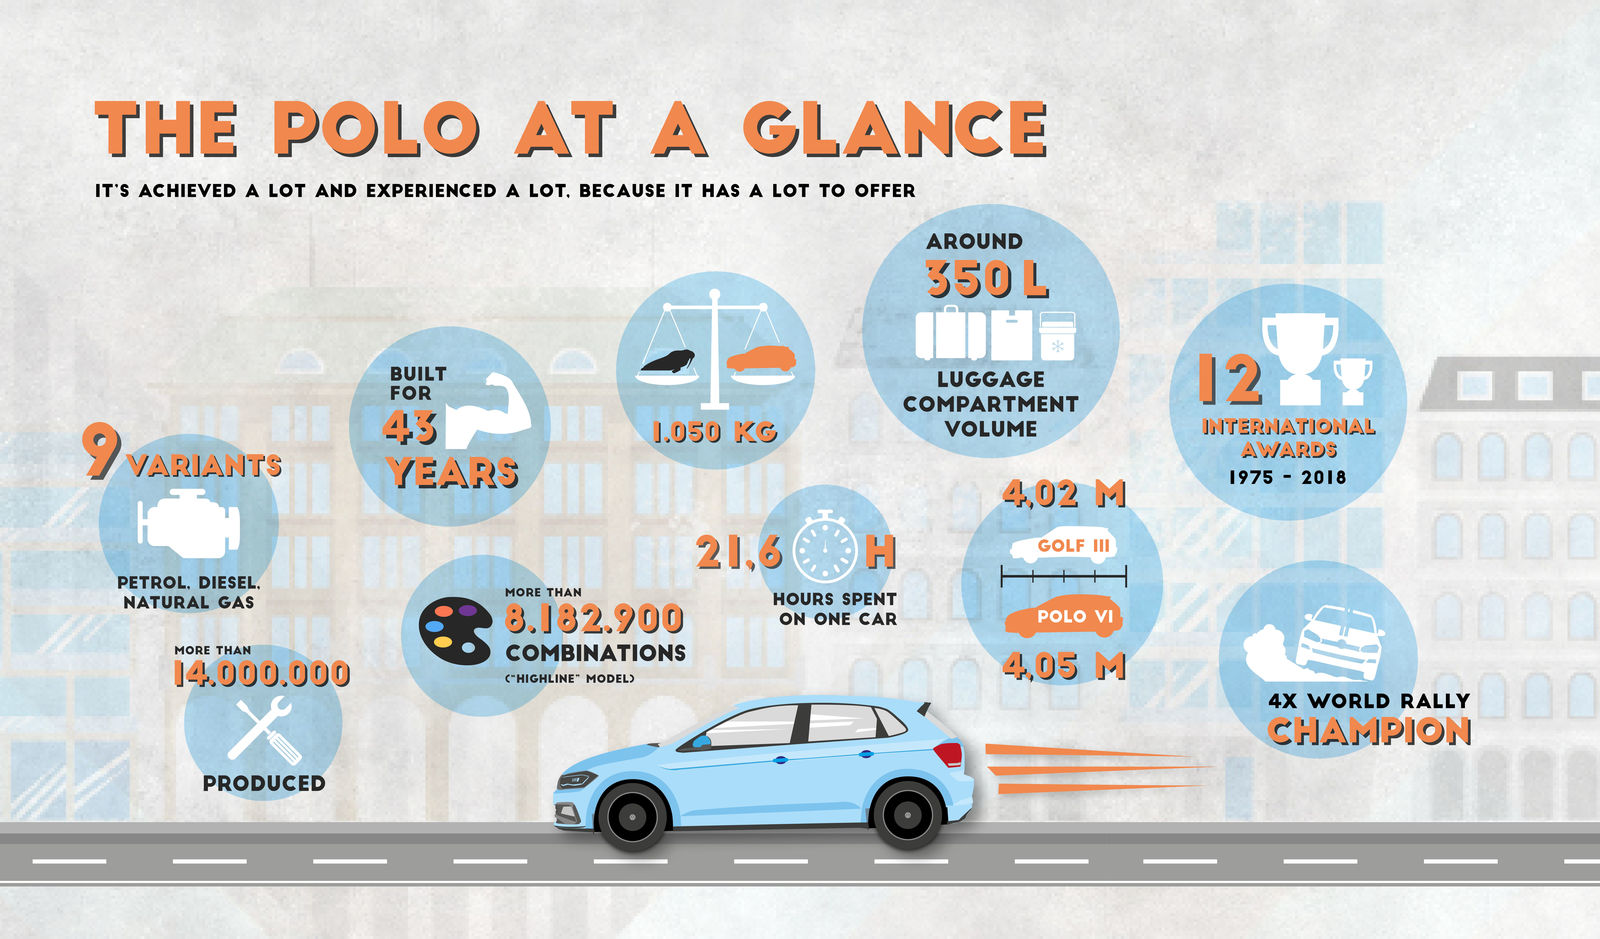 Story: The Polo at a glance